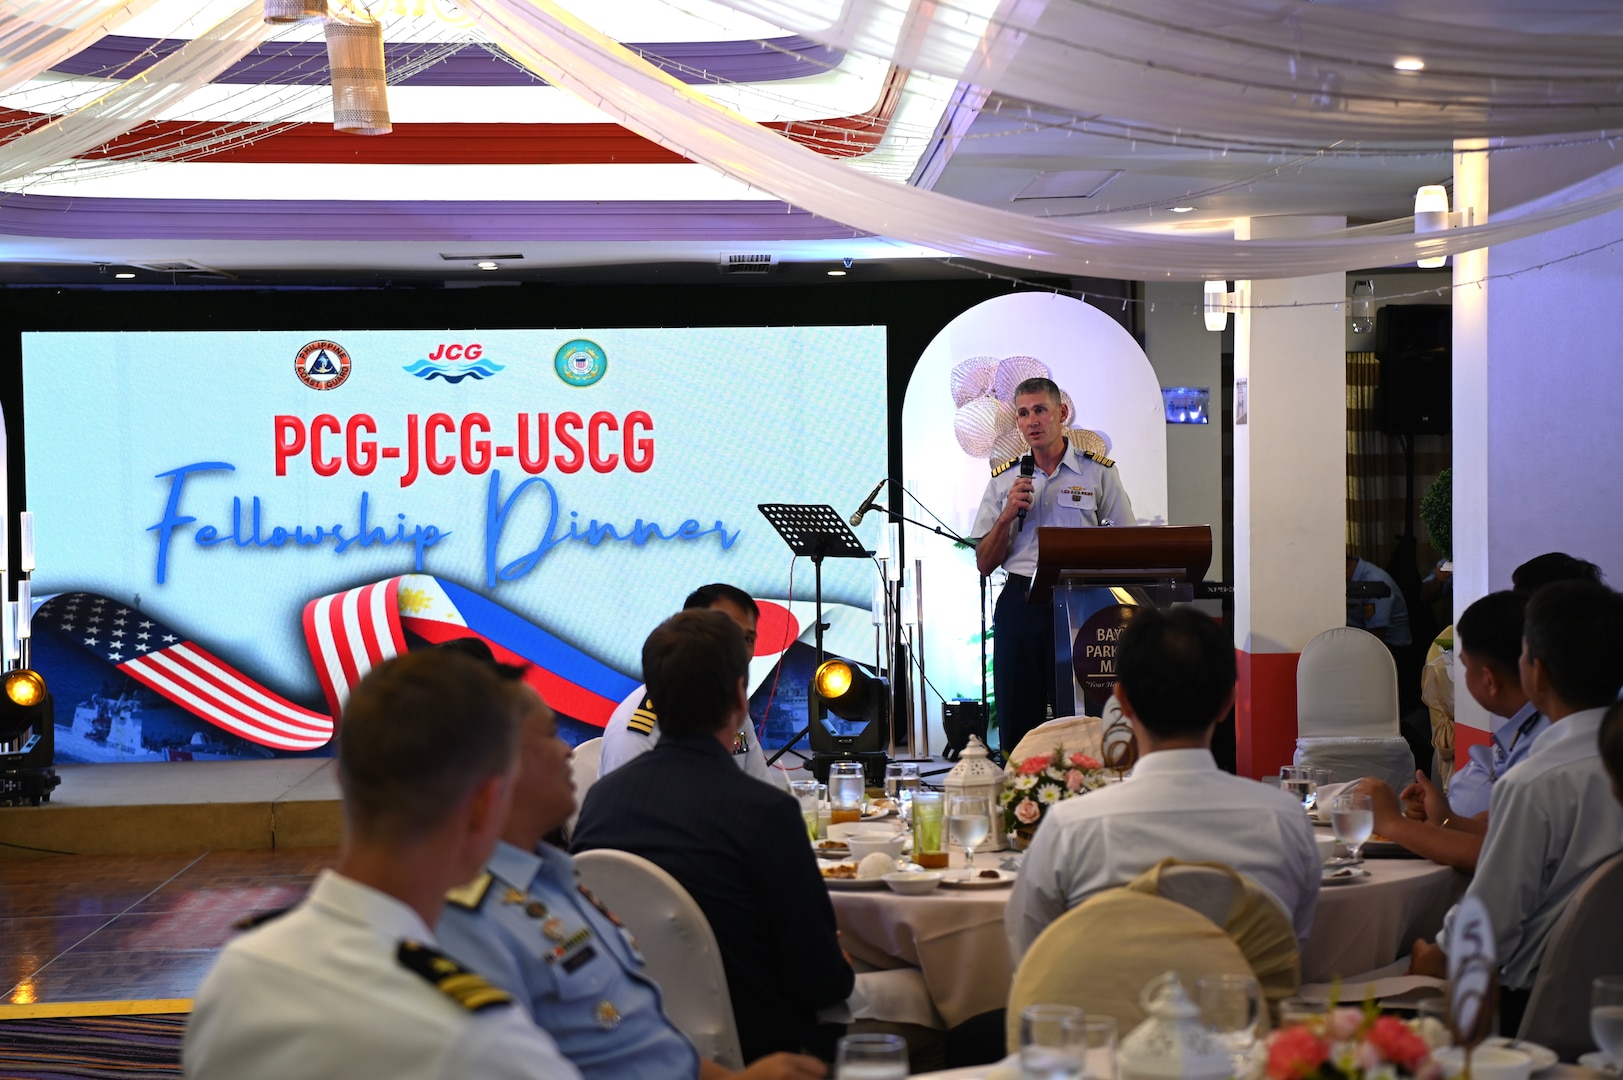 Capt. Brian Krautler, U.S. Coast Guard Cutter Stratton's (WMSL 752) commanding officer, speaks to servicemembers from the Japan Coast Guard Vessel Akitsushima (PLH 32) and the Philippine Coast Guard during a fellowship dinner in Manila, Philippines, June 1, 2023. Stratton deployed to the Western Pacific to engage with regional allies and partner nations, reinforcing a rules-based order and maritime governance to promote a free and open Indo-Pacific. (U.S. Coast Guard photo by Chief Petty Officer Matt Masaschi)